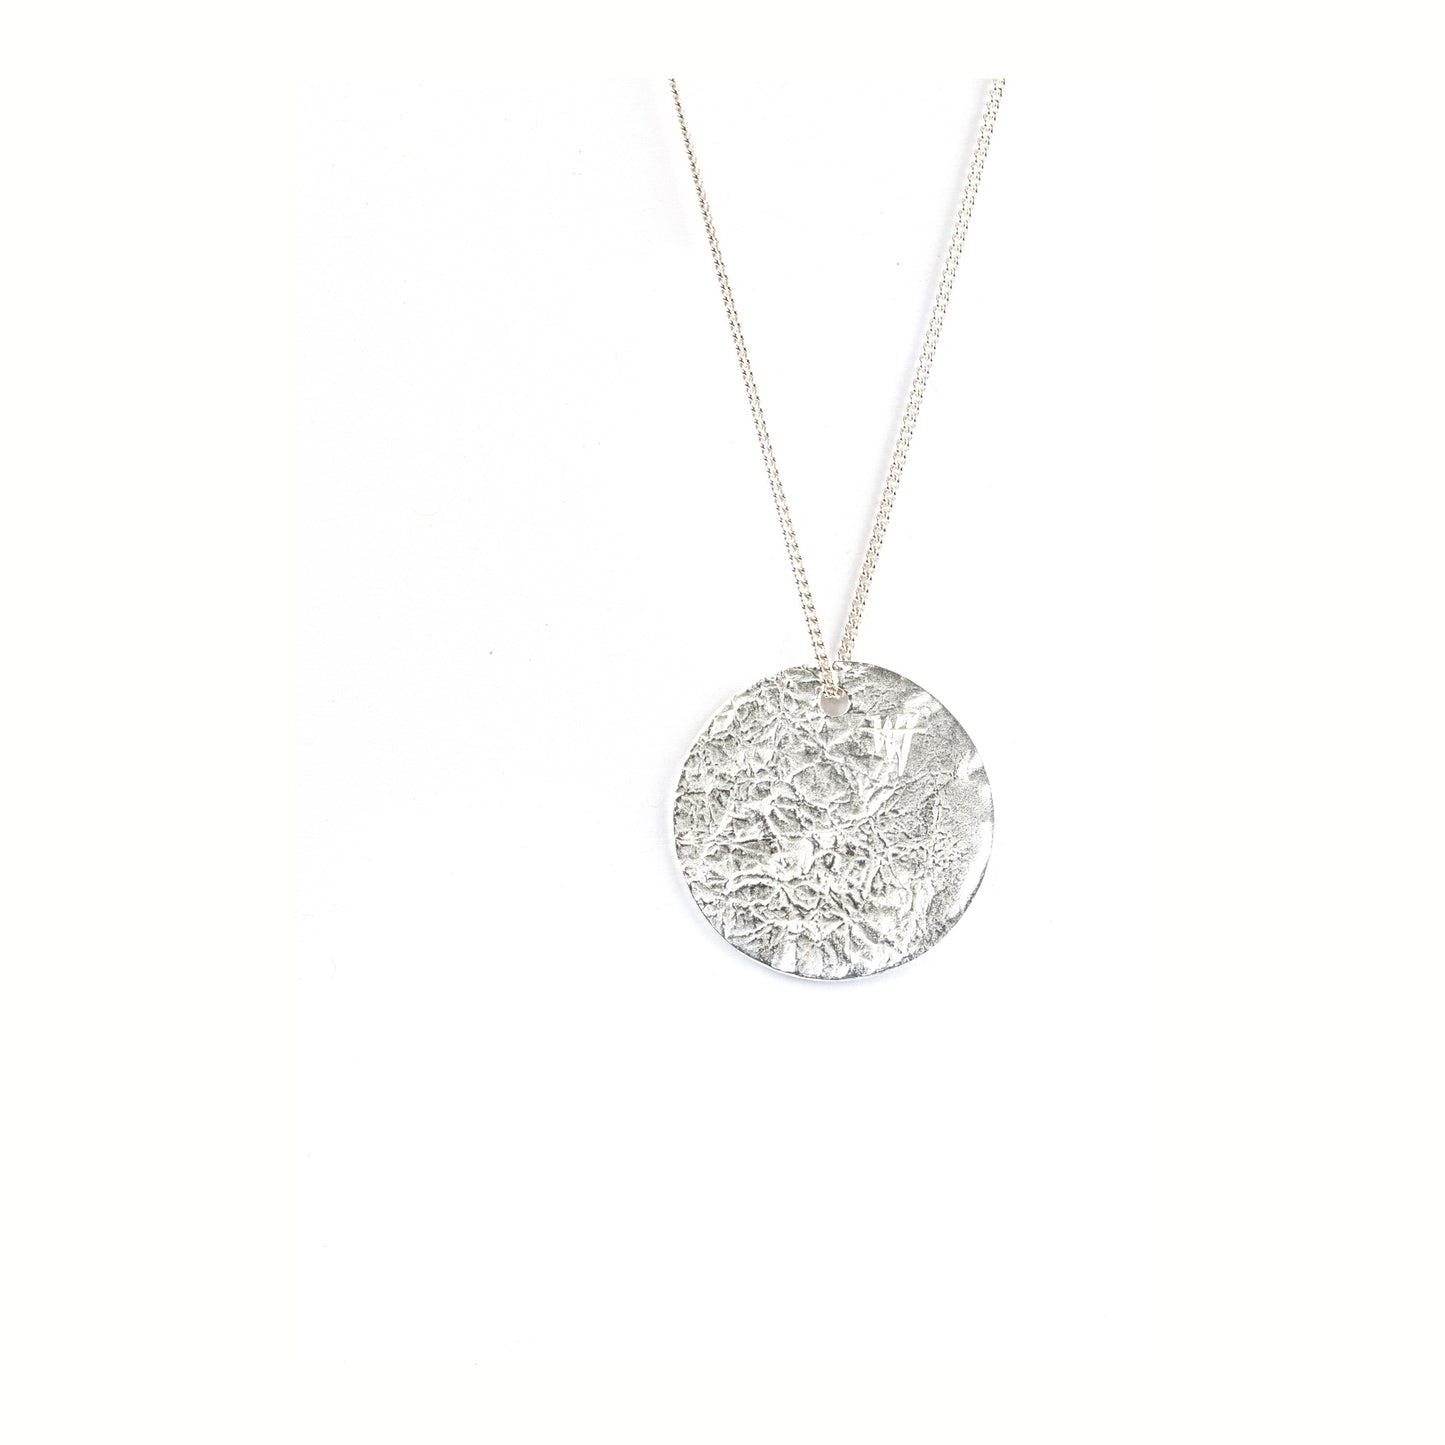 Cybele necklace